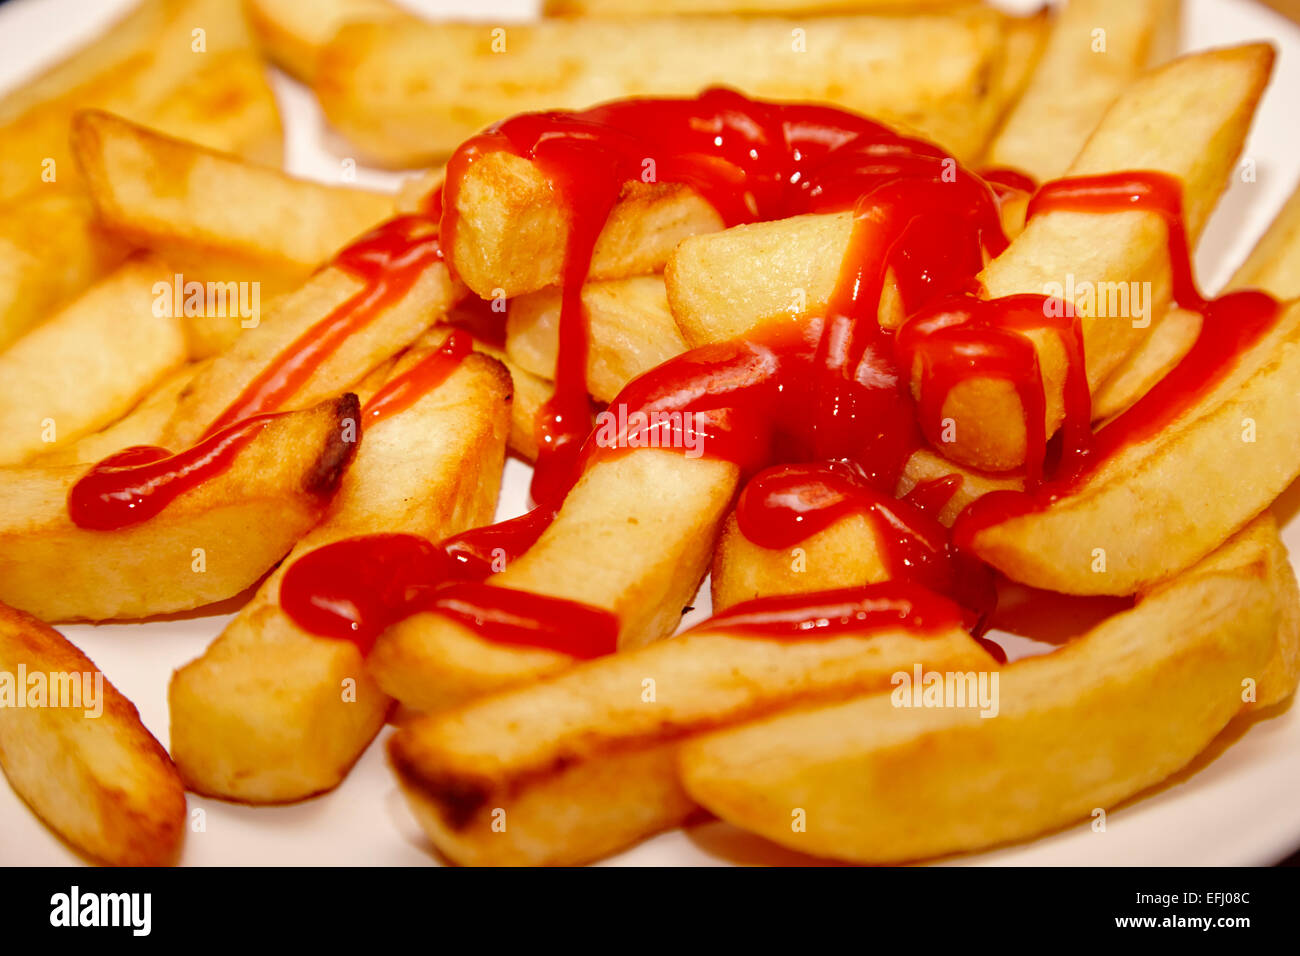 plate of cooked oven chips covered in tomato ketchup Stock Photo